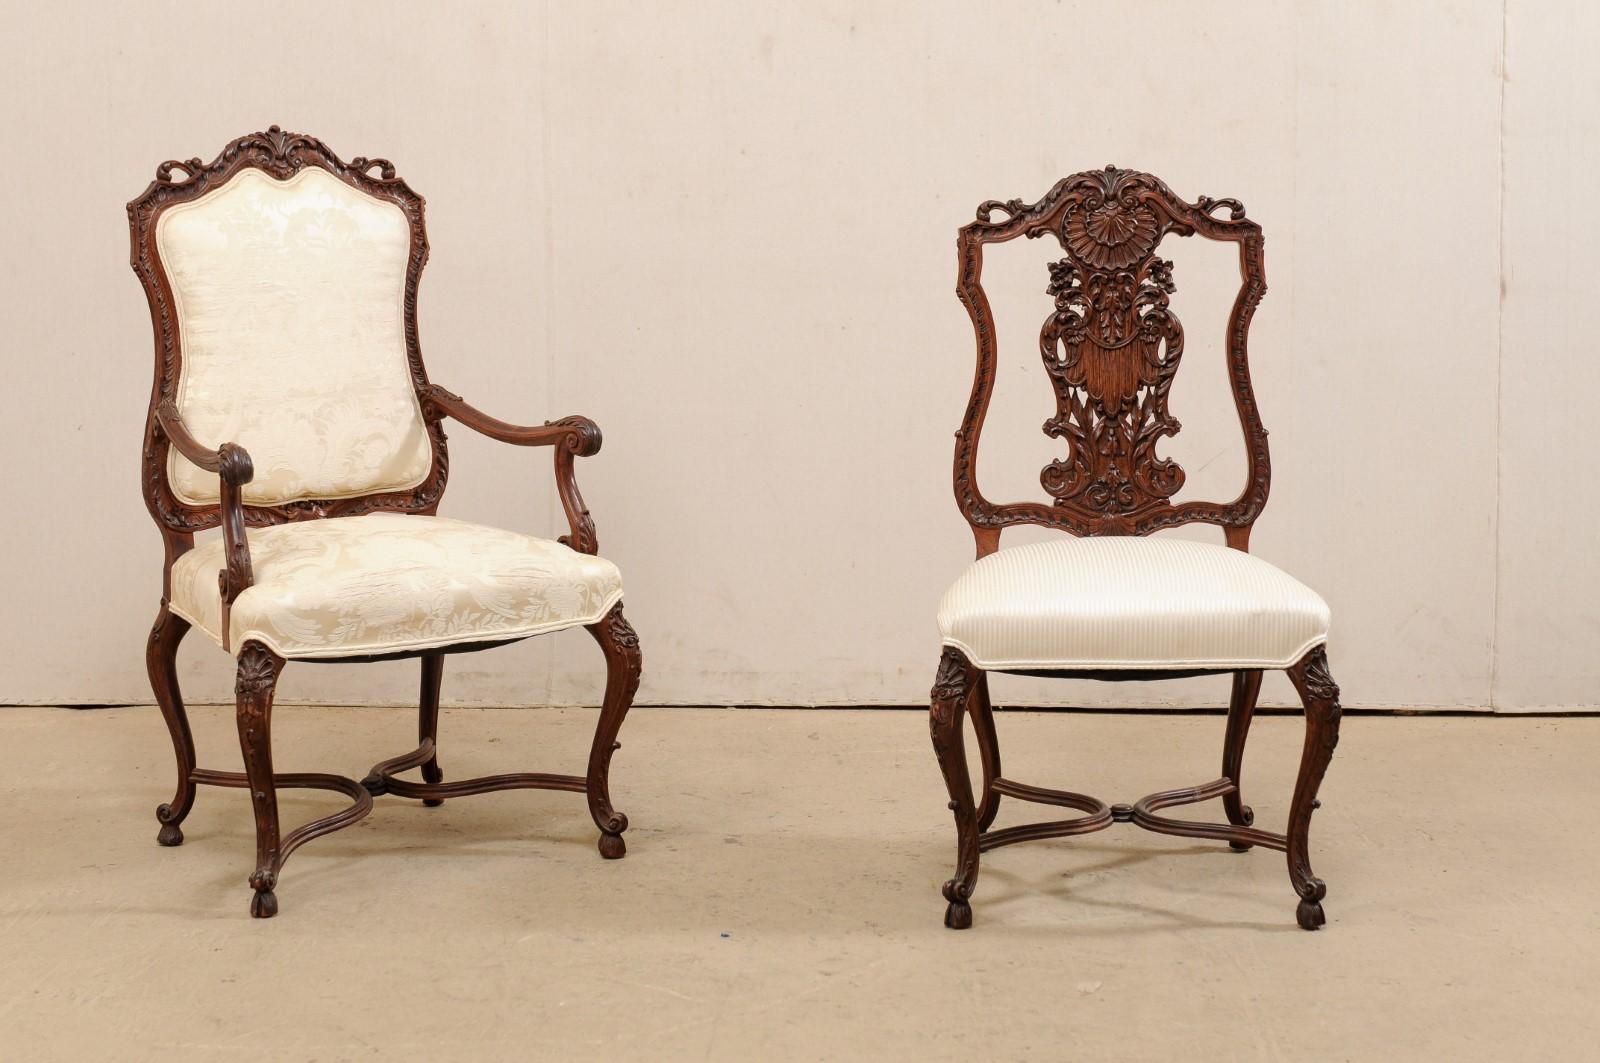 A French set of eight carved-wood, shield-shaped back chairs from the mid-20th century. This vintage set of chairs, consisting of a pair of arm chairs and six side chairs, feature a elaborately carved wood frames and shield-shaped backs. The side